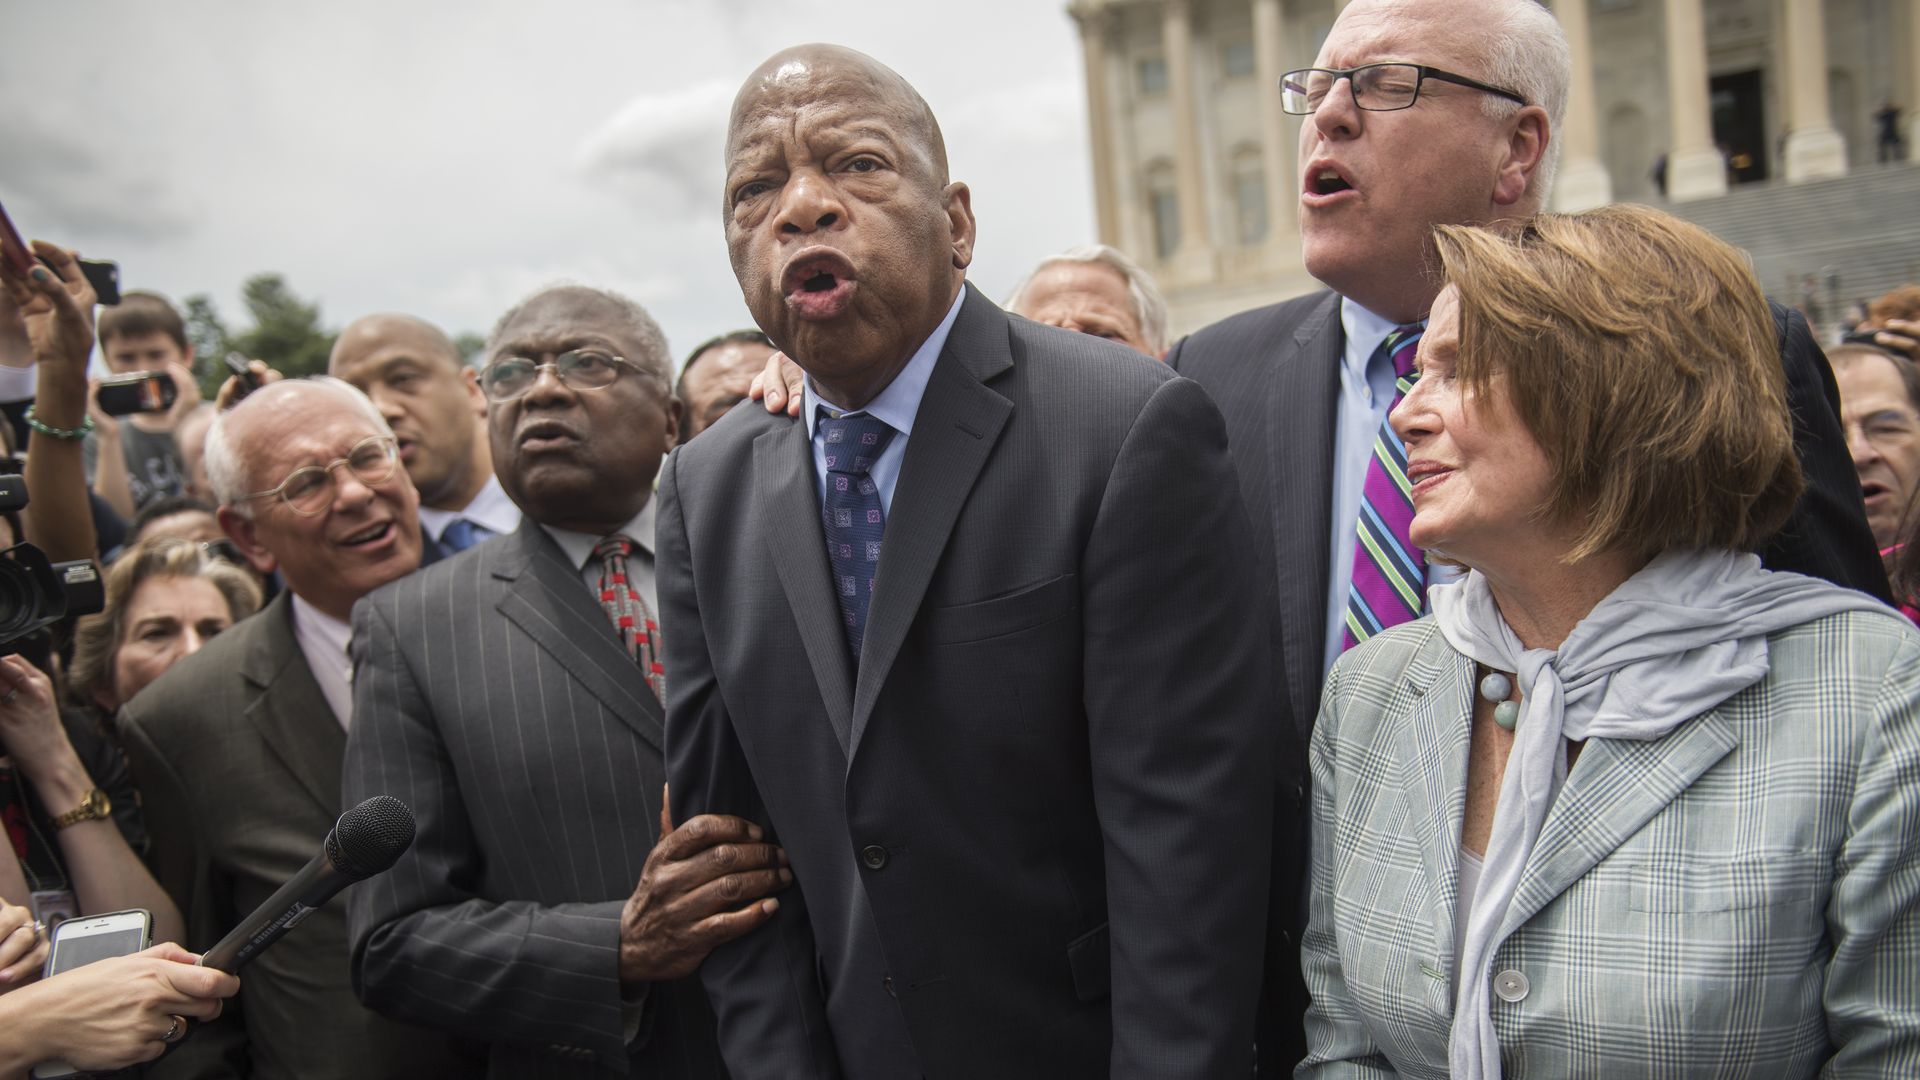 John Lewis, Nancy Pelosi and others, speaking at a rally.